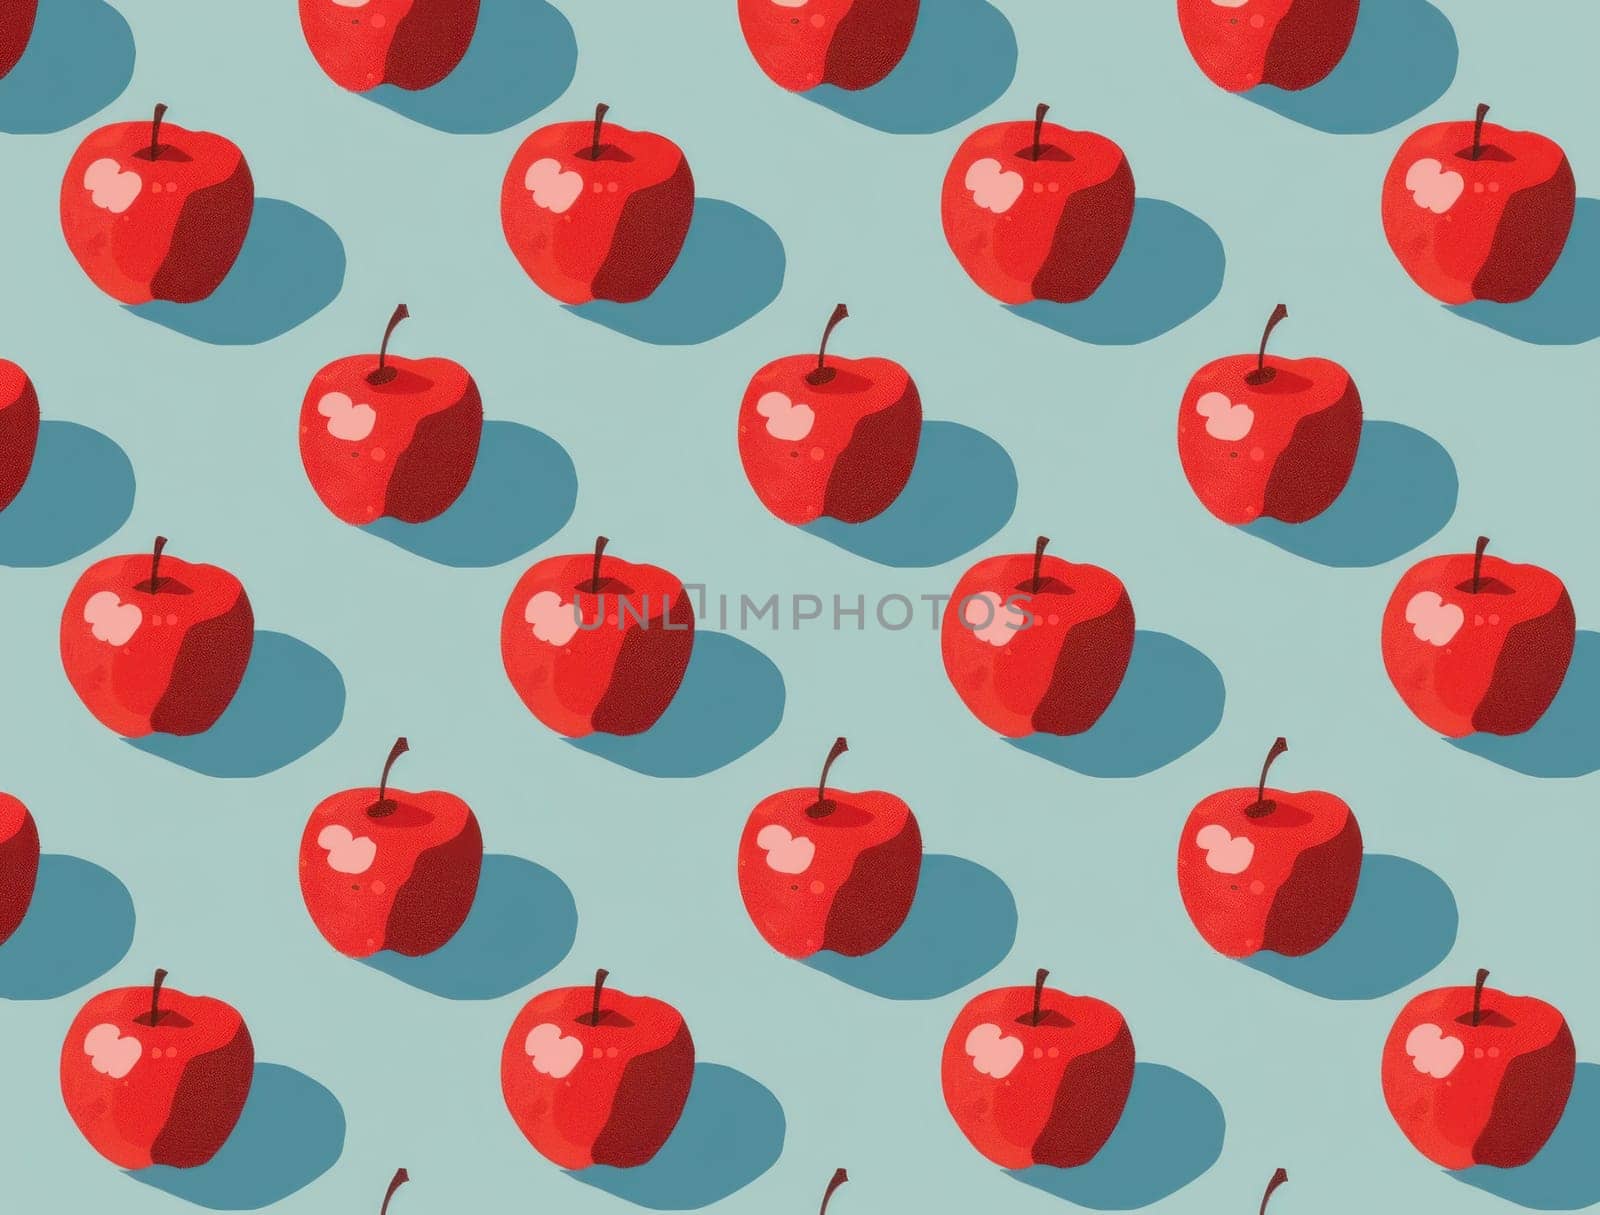 Apple orchard delight vibrant seamless pattern of red apples on blue background with shadows and highlights